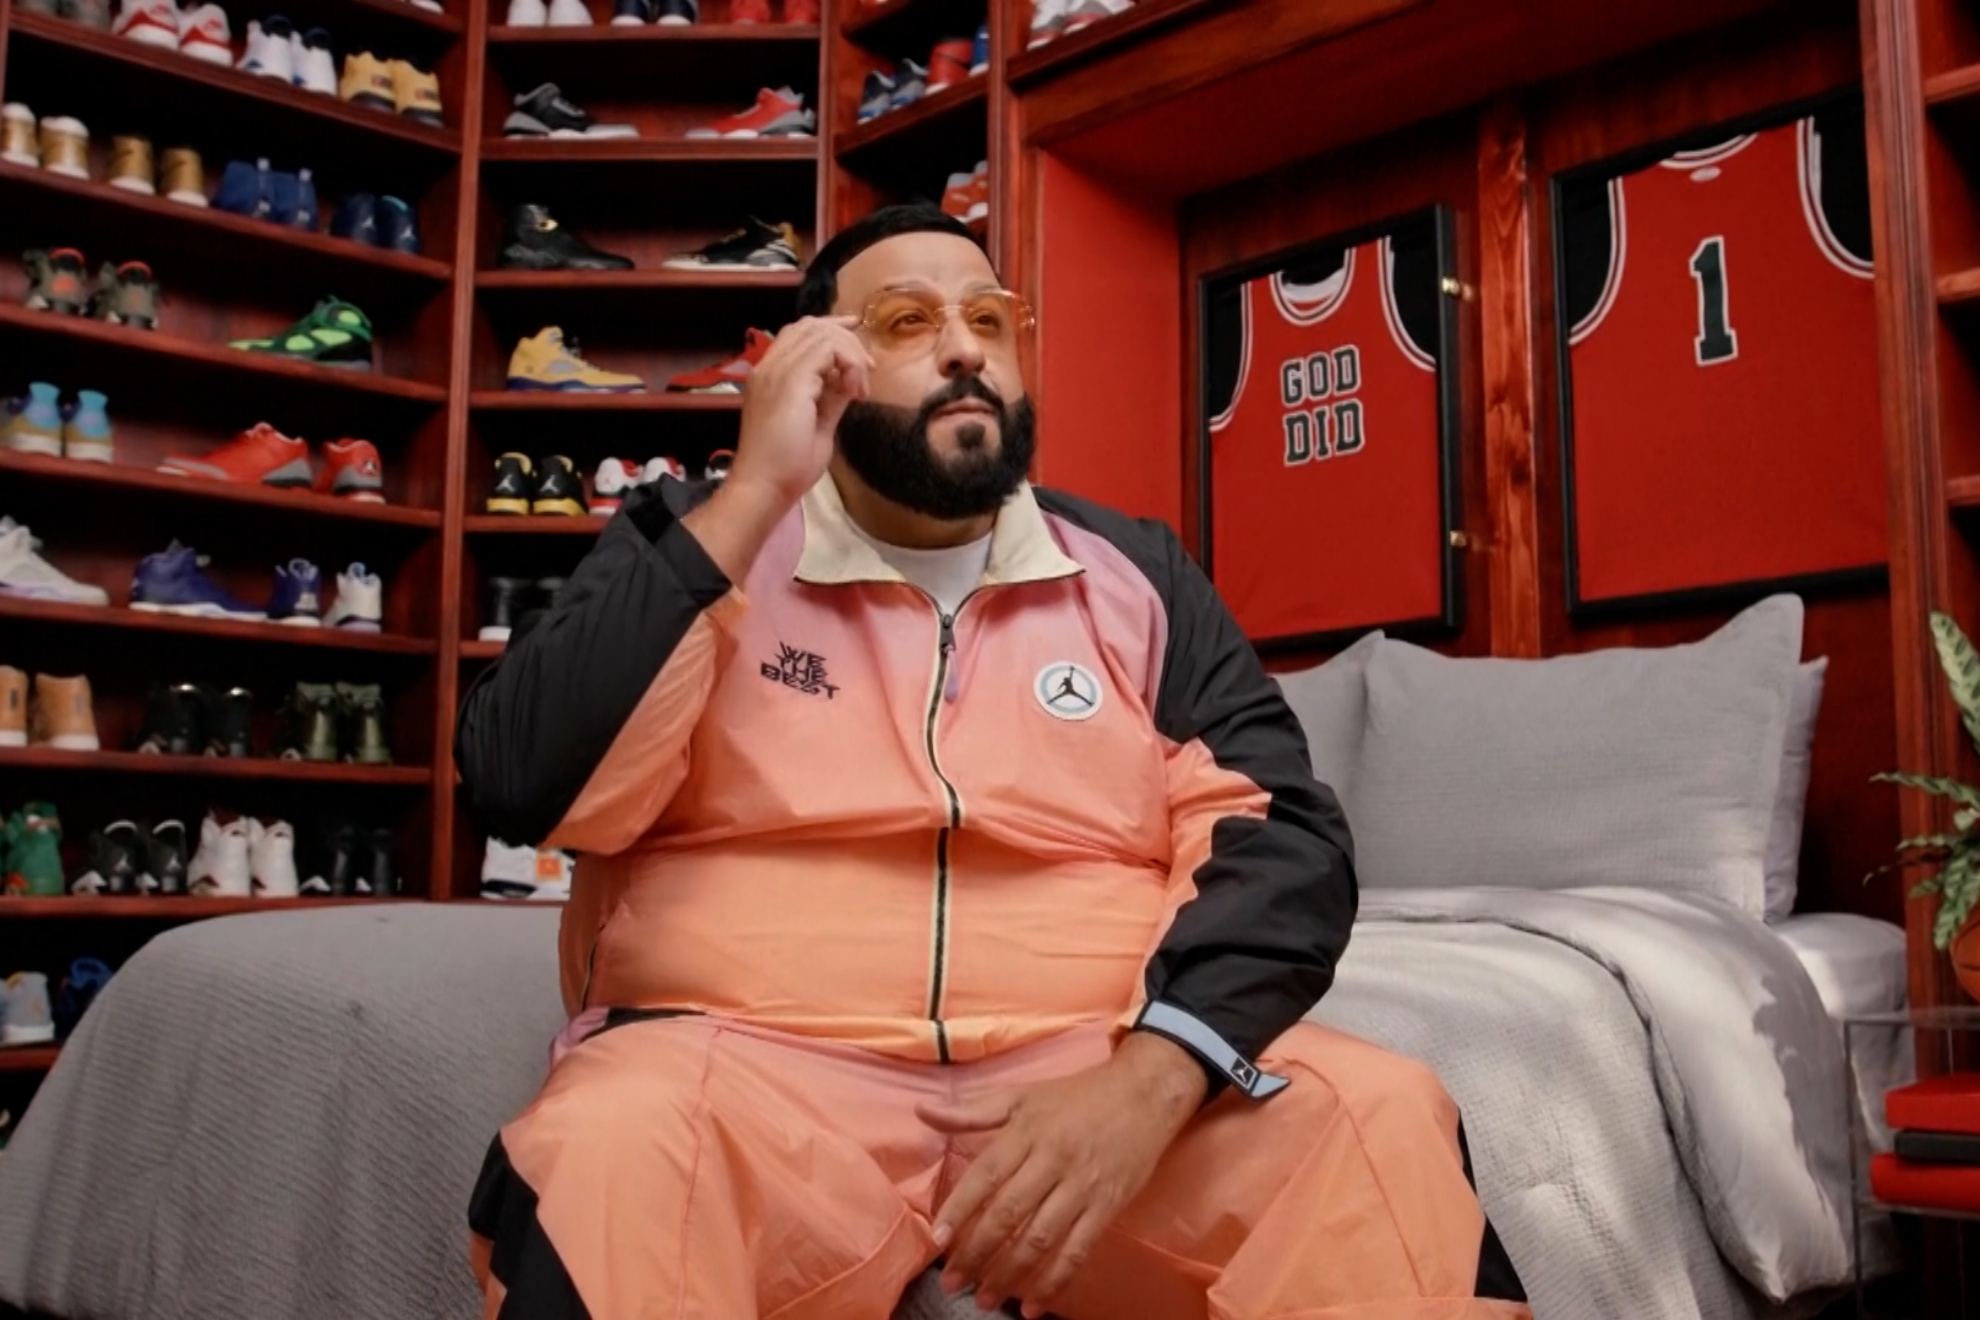 DJ Khaled x Air Jordan 5 We The Best: Release date, price, and where to buy